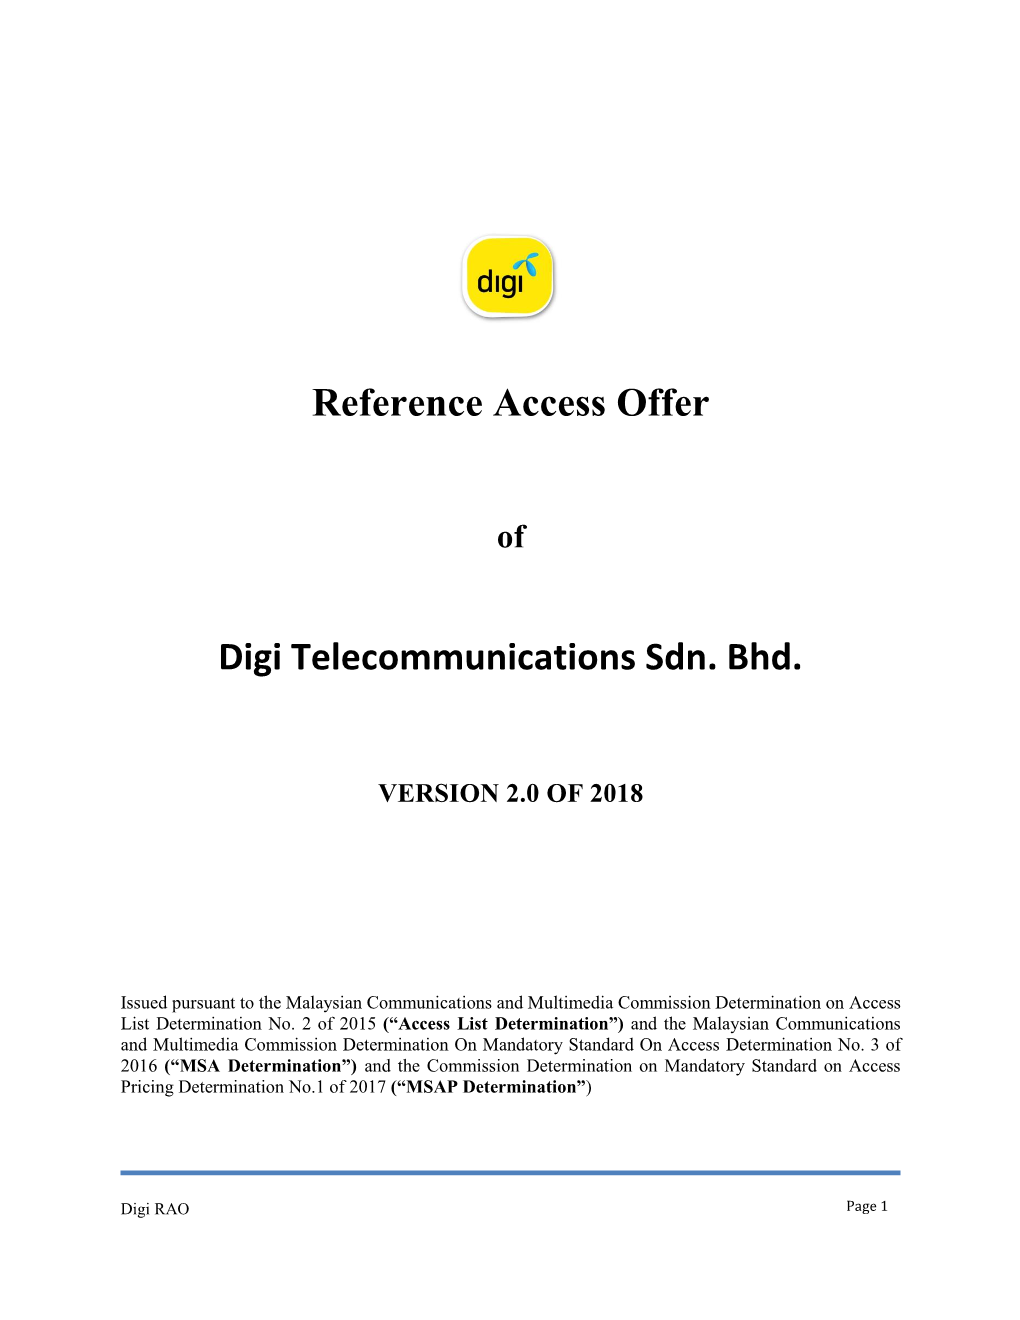 Reference Access Offer Digi Telecommunications Sdn. Bhd